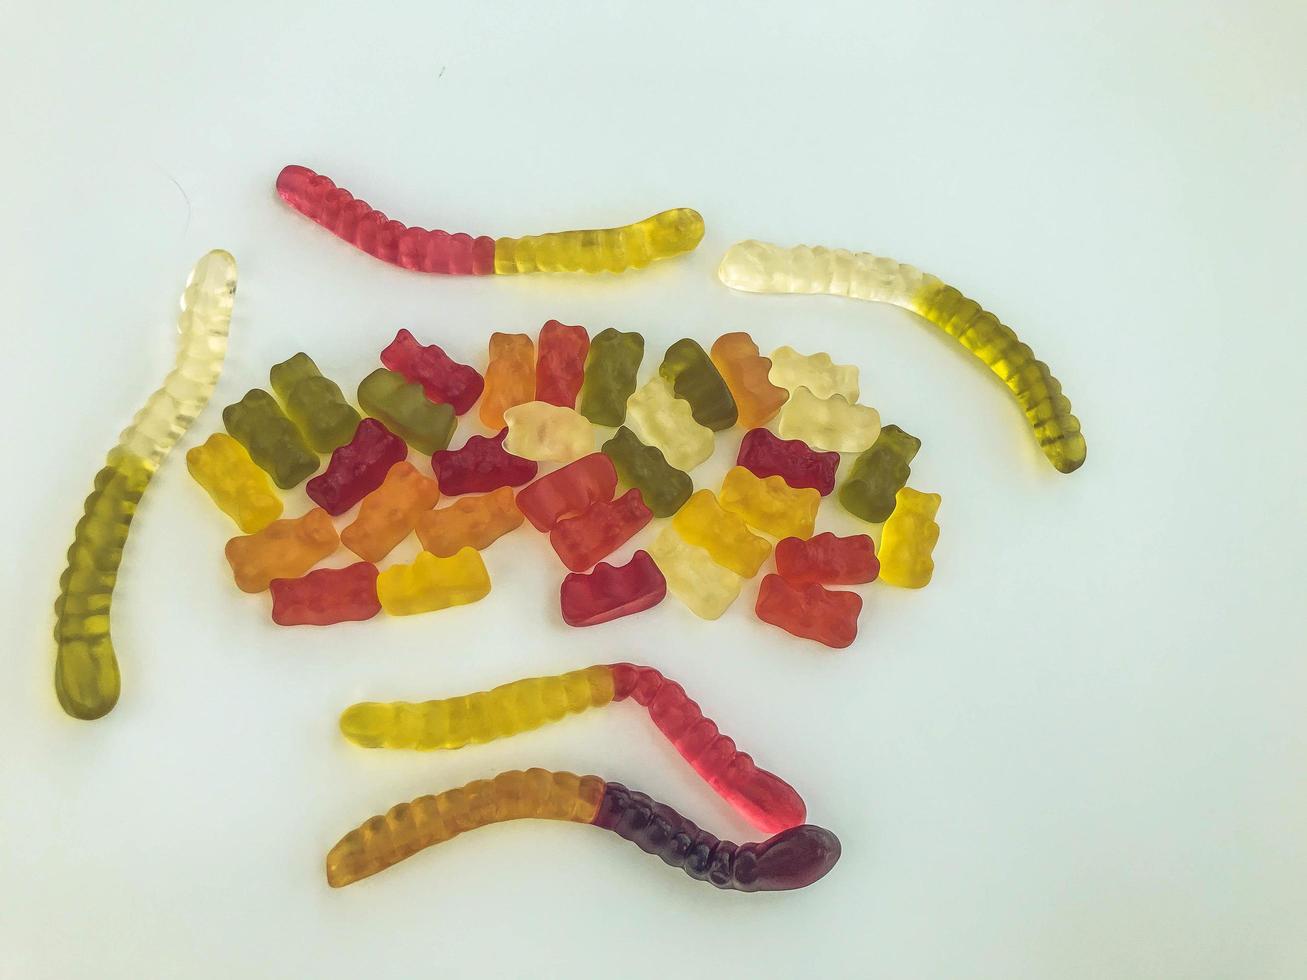 gummy candies lie on a white matte background. gelatinous worms and bears of different colors intertwined with each other. mouth-watering culinary masterpieces. decorating cakes and pastries photo